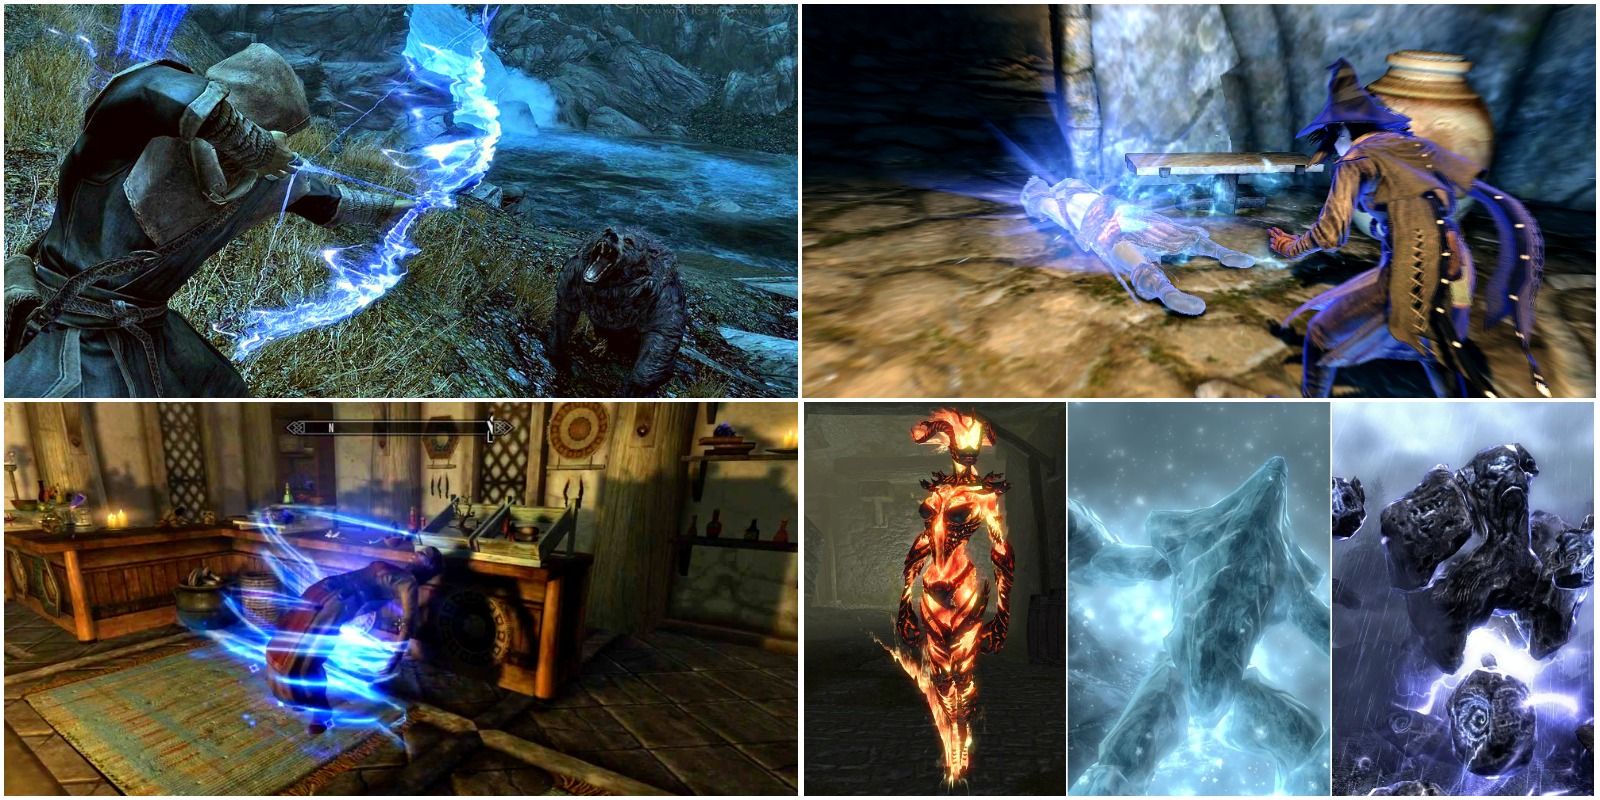 spells in the conjuration skill such as bound bow, raise dead, soul trap and a few images of elemental atronachs.